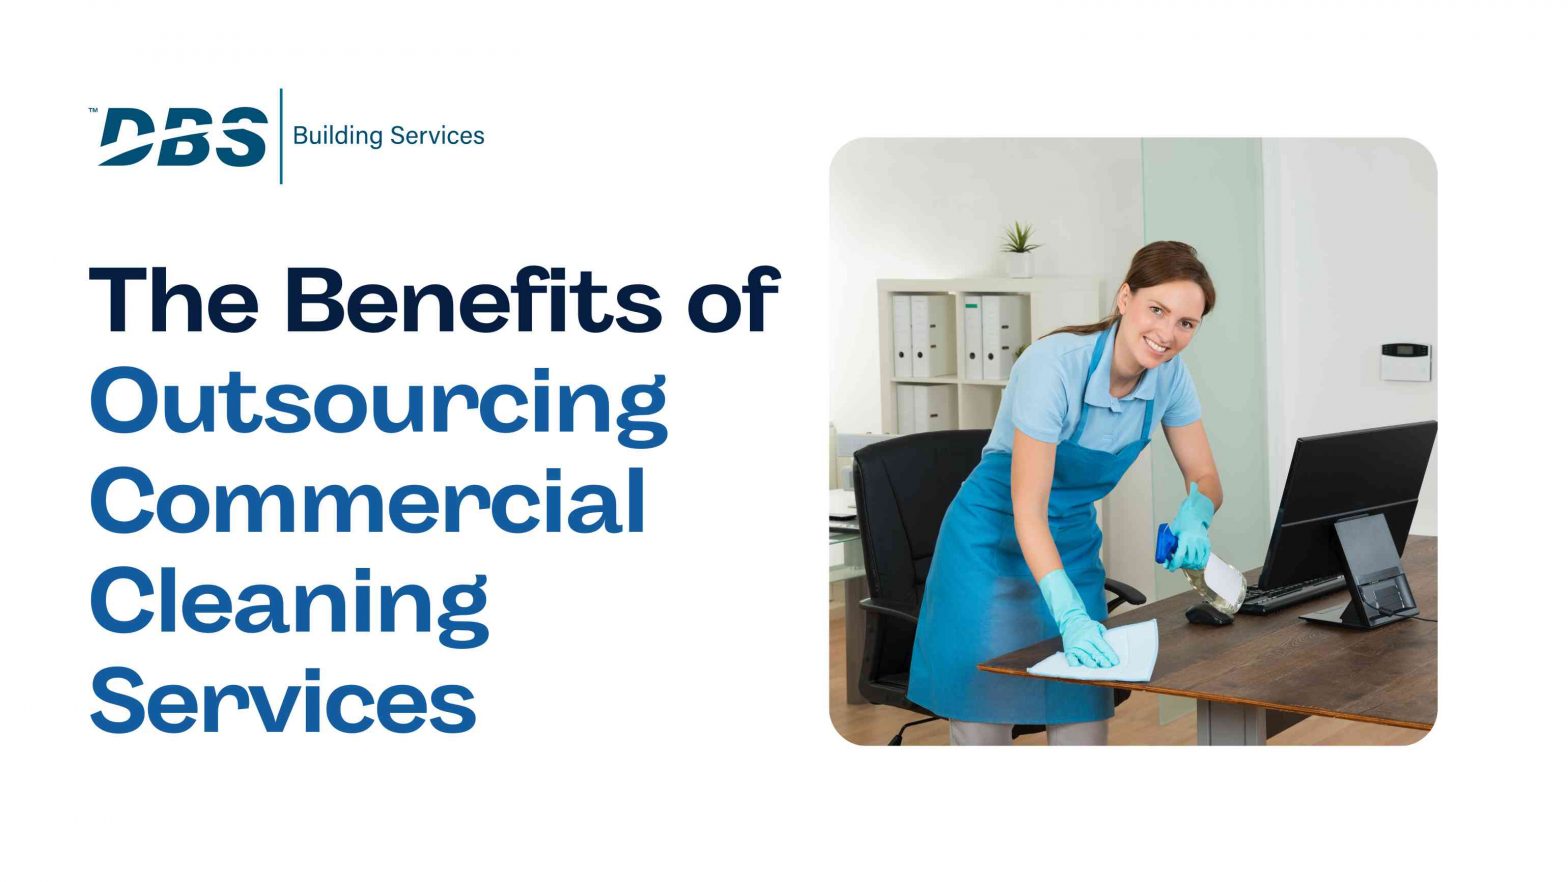 Outsourcing Commercial Cleaning